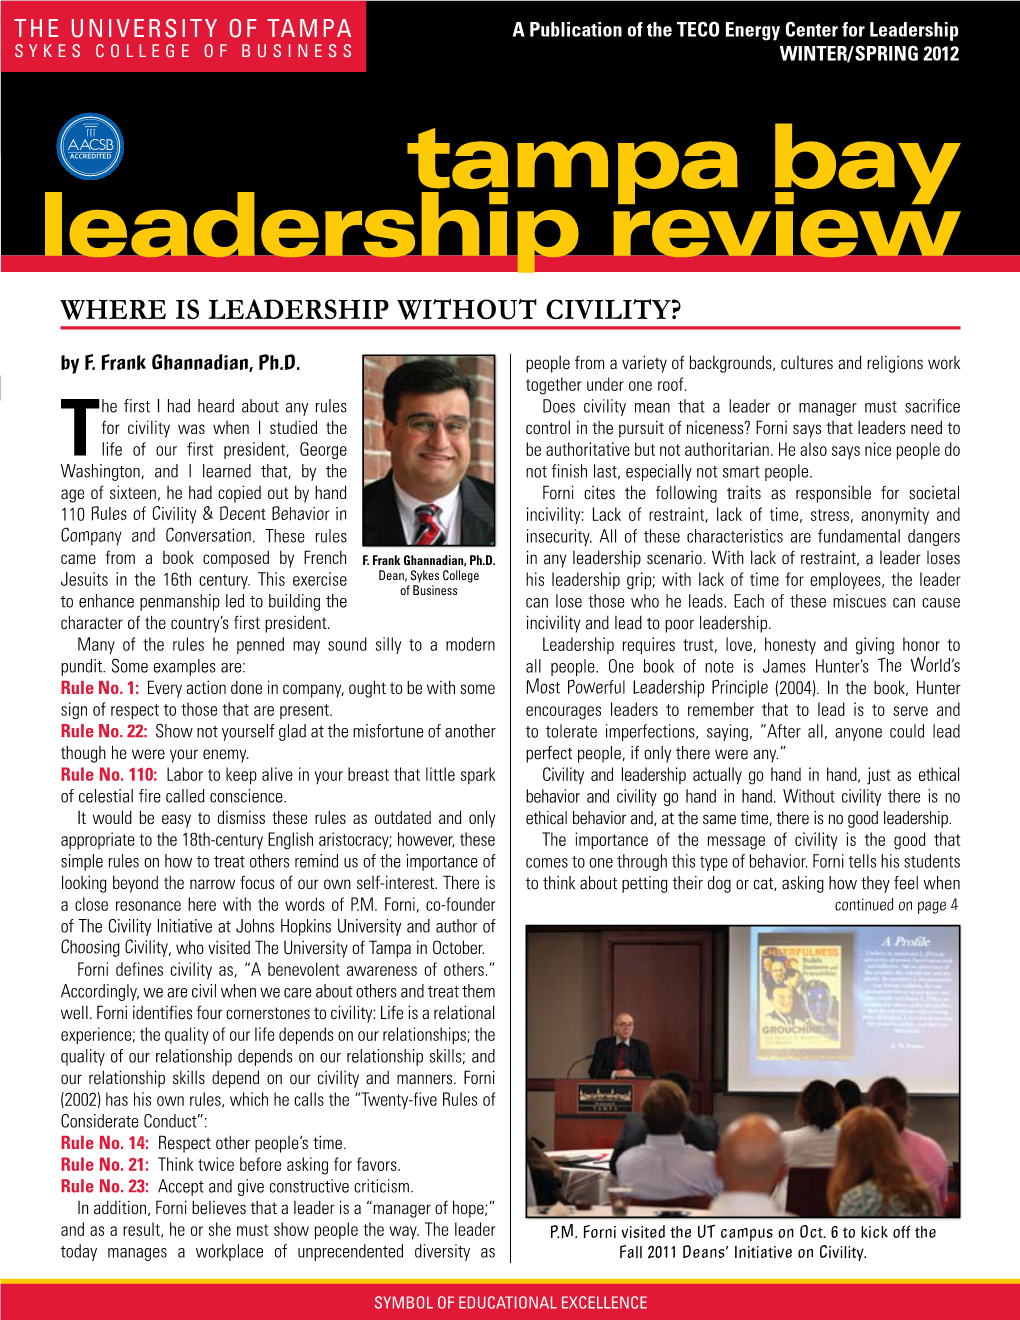 Tampa Bay Leadership Review Symbol of Educational Excellence